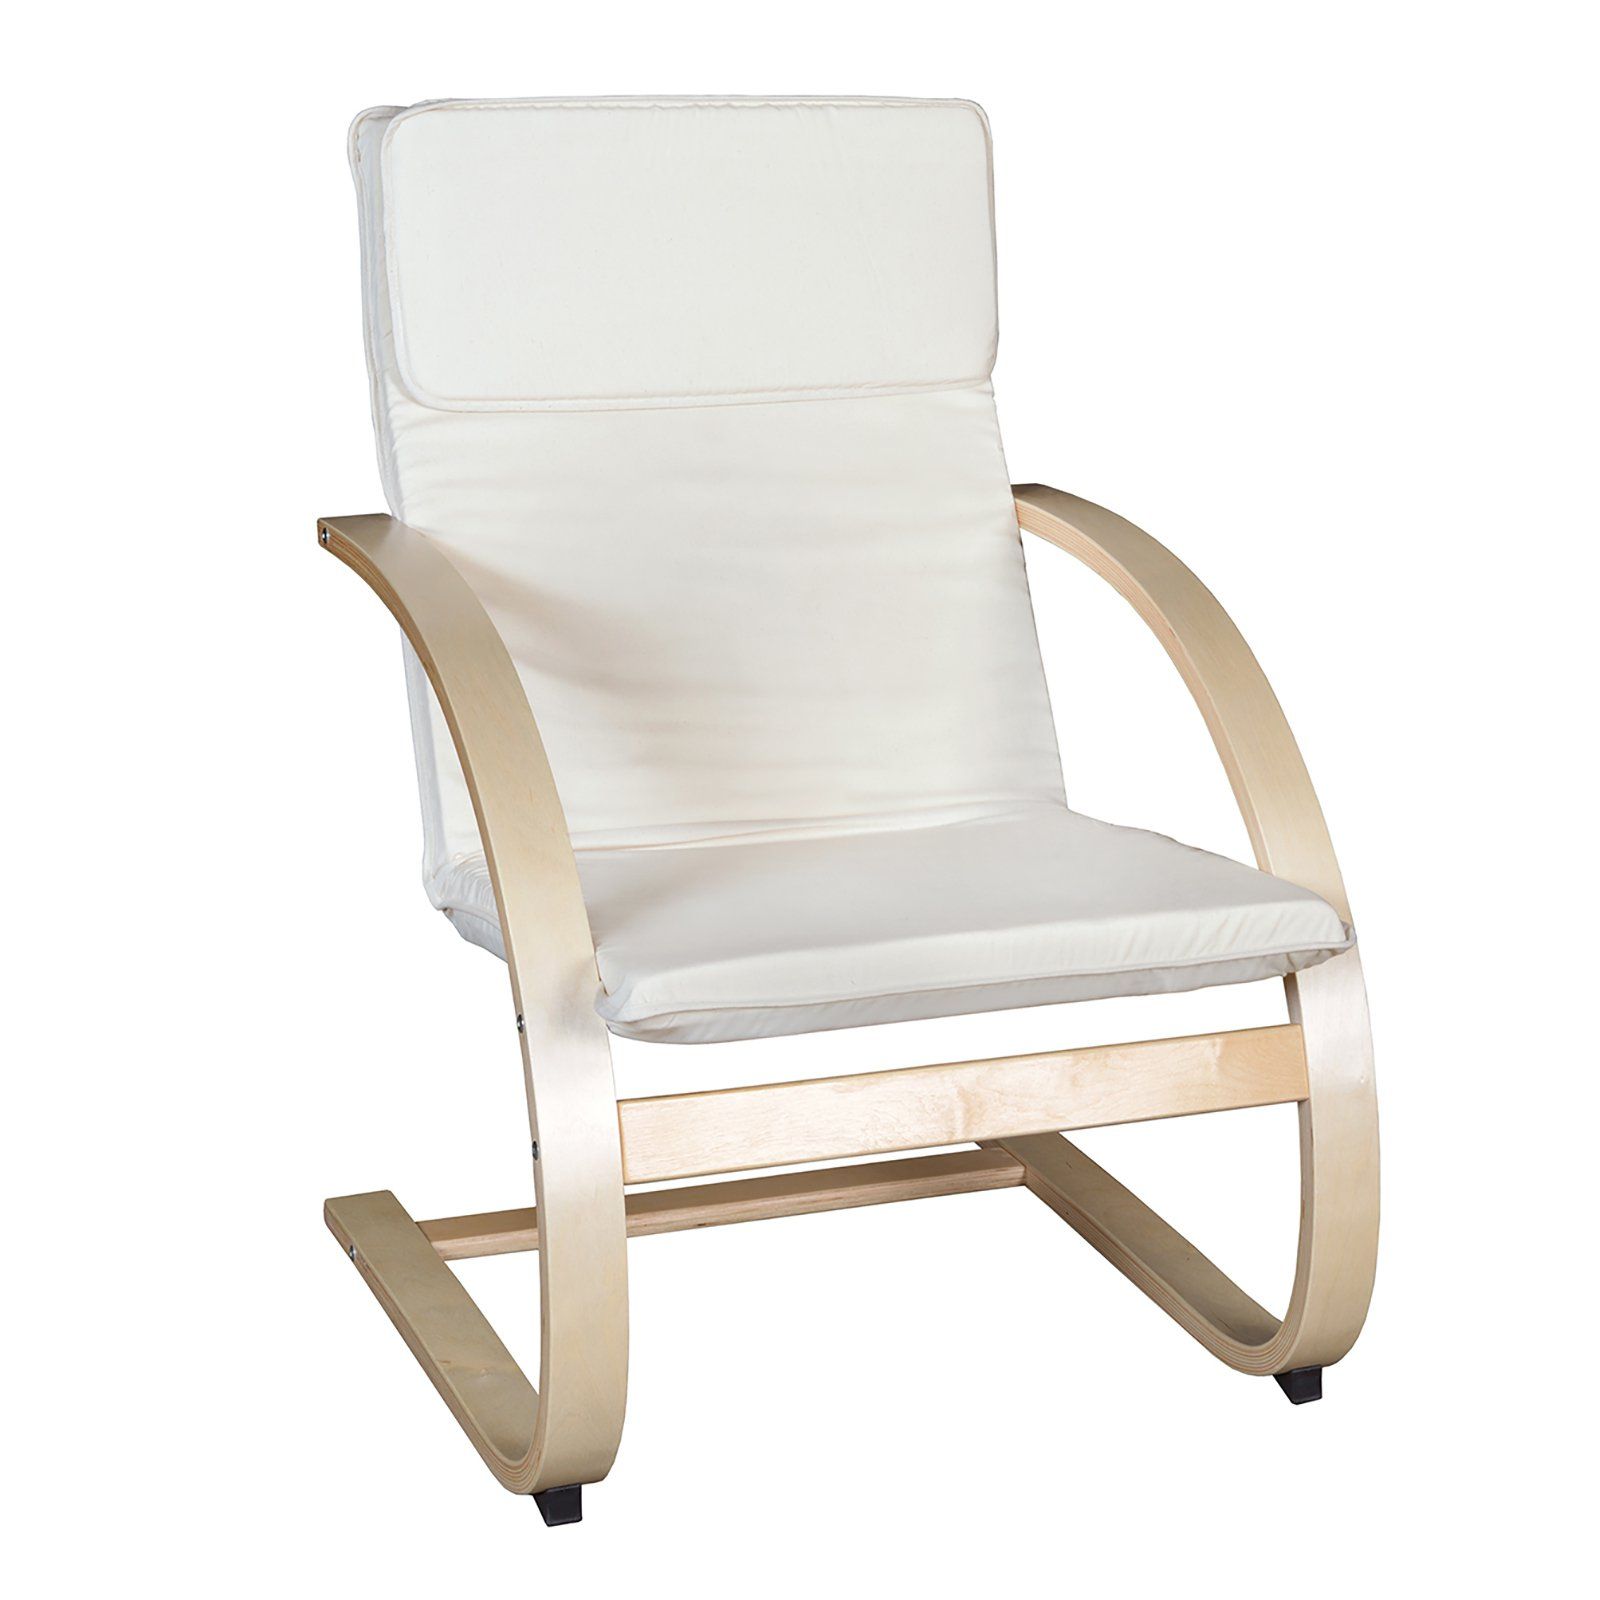 Outdoor Regency Niche Mia Bentwood Reclining Chair In 2019 Throughout Mia Bentwood Chairs (View 9 of 20)